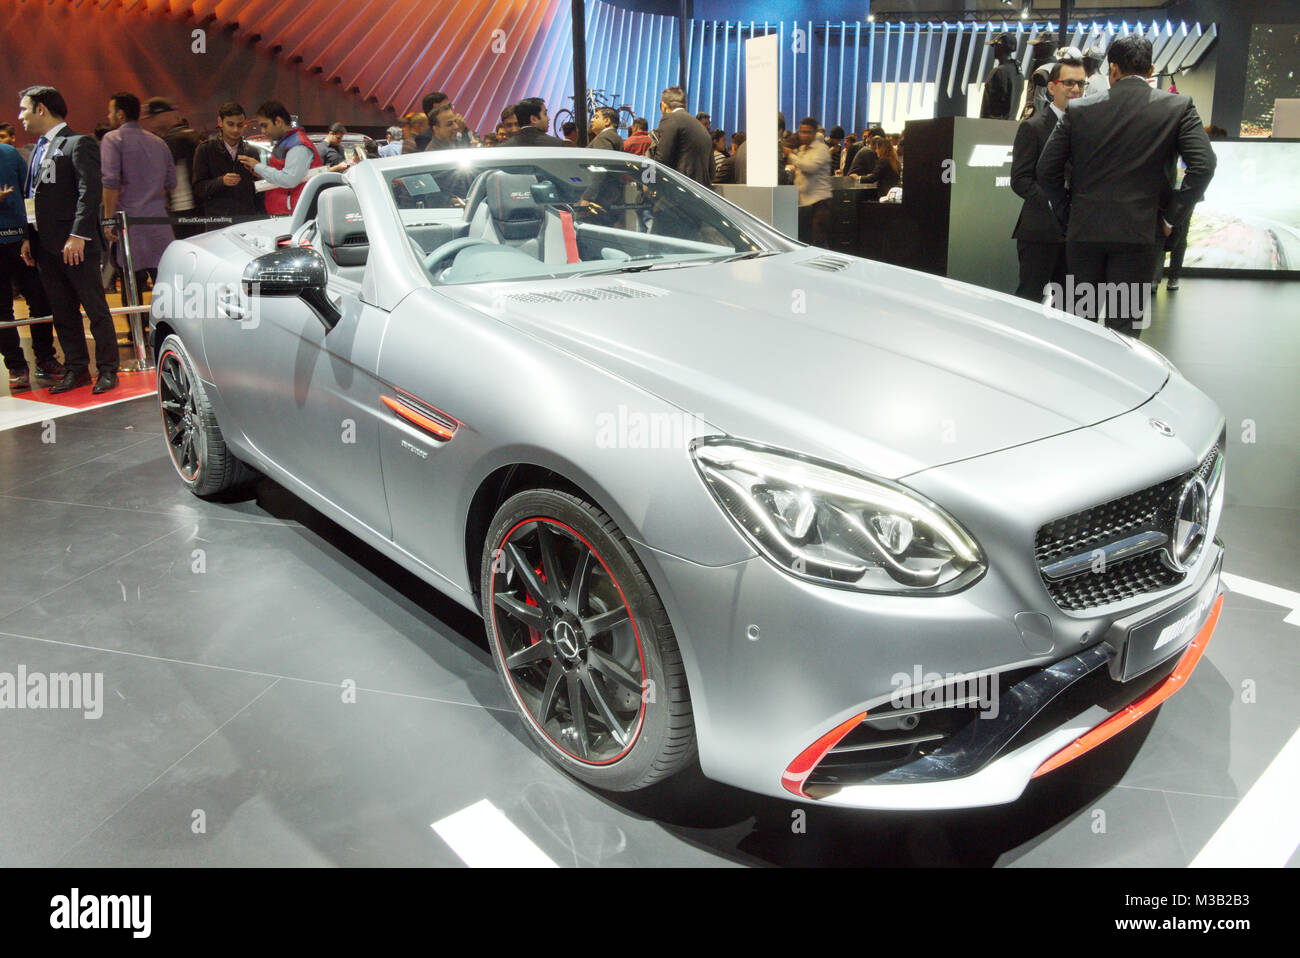 Greater Noida, India. 9th February 2018. Mercedes-AMG SLC 43 RedArt Edition is on display at the Auto Expo 2018 at India Expo Mart in Greater Noida, India. The Auto Expo is a biennial event and is being held during 9th to 14th February 2018. Credit: Karunesh Johri/Alamy Live News. Stock Photo